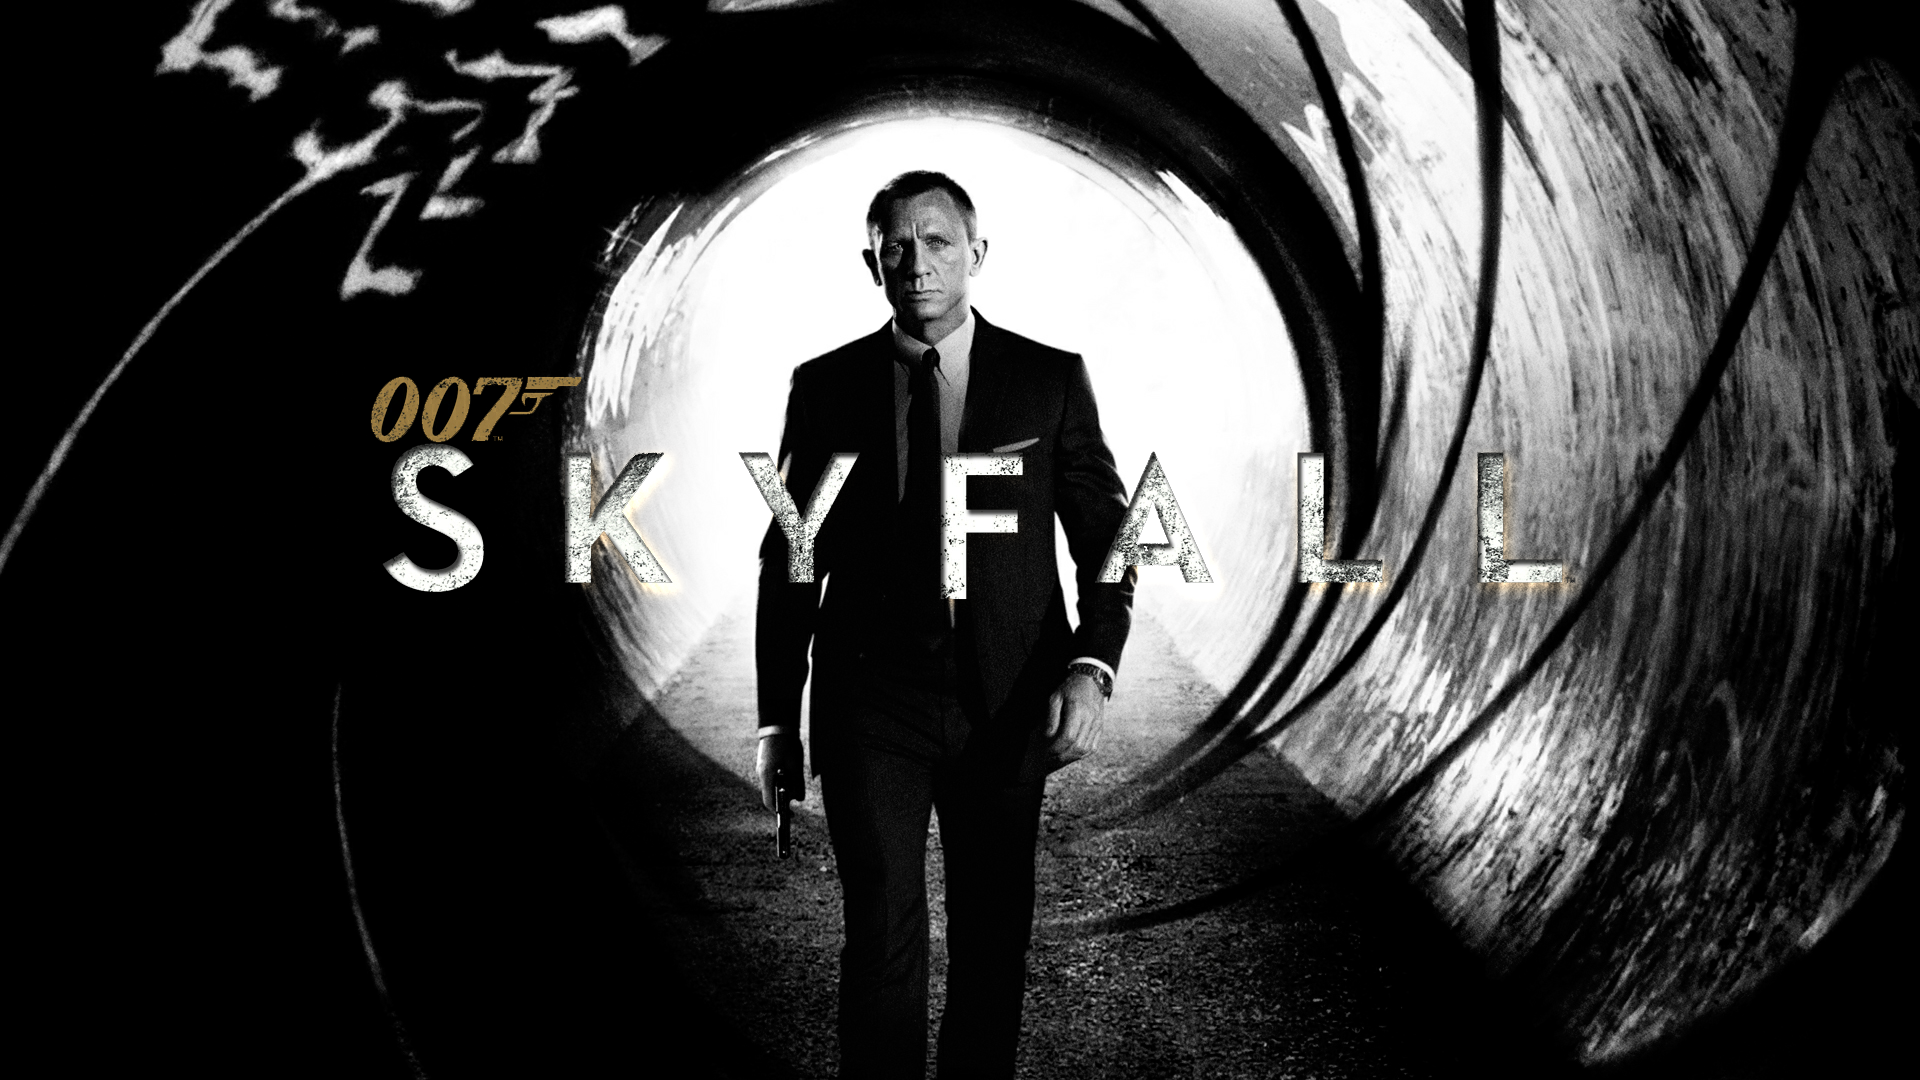 Skyfall for apple download free